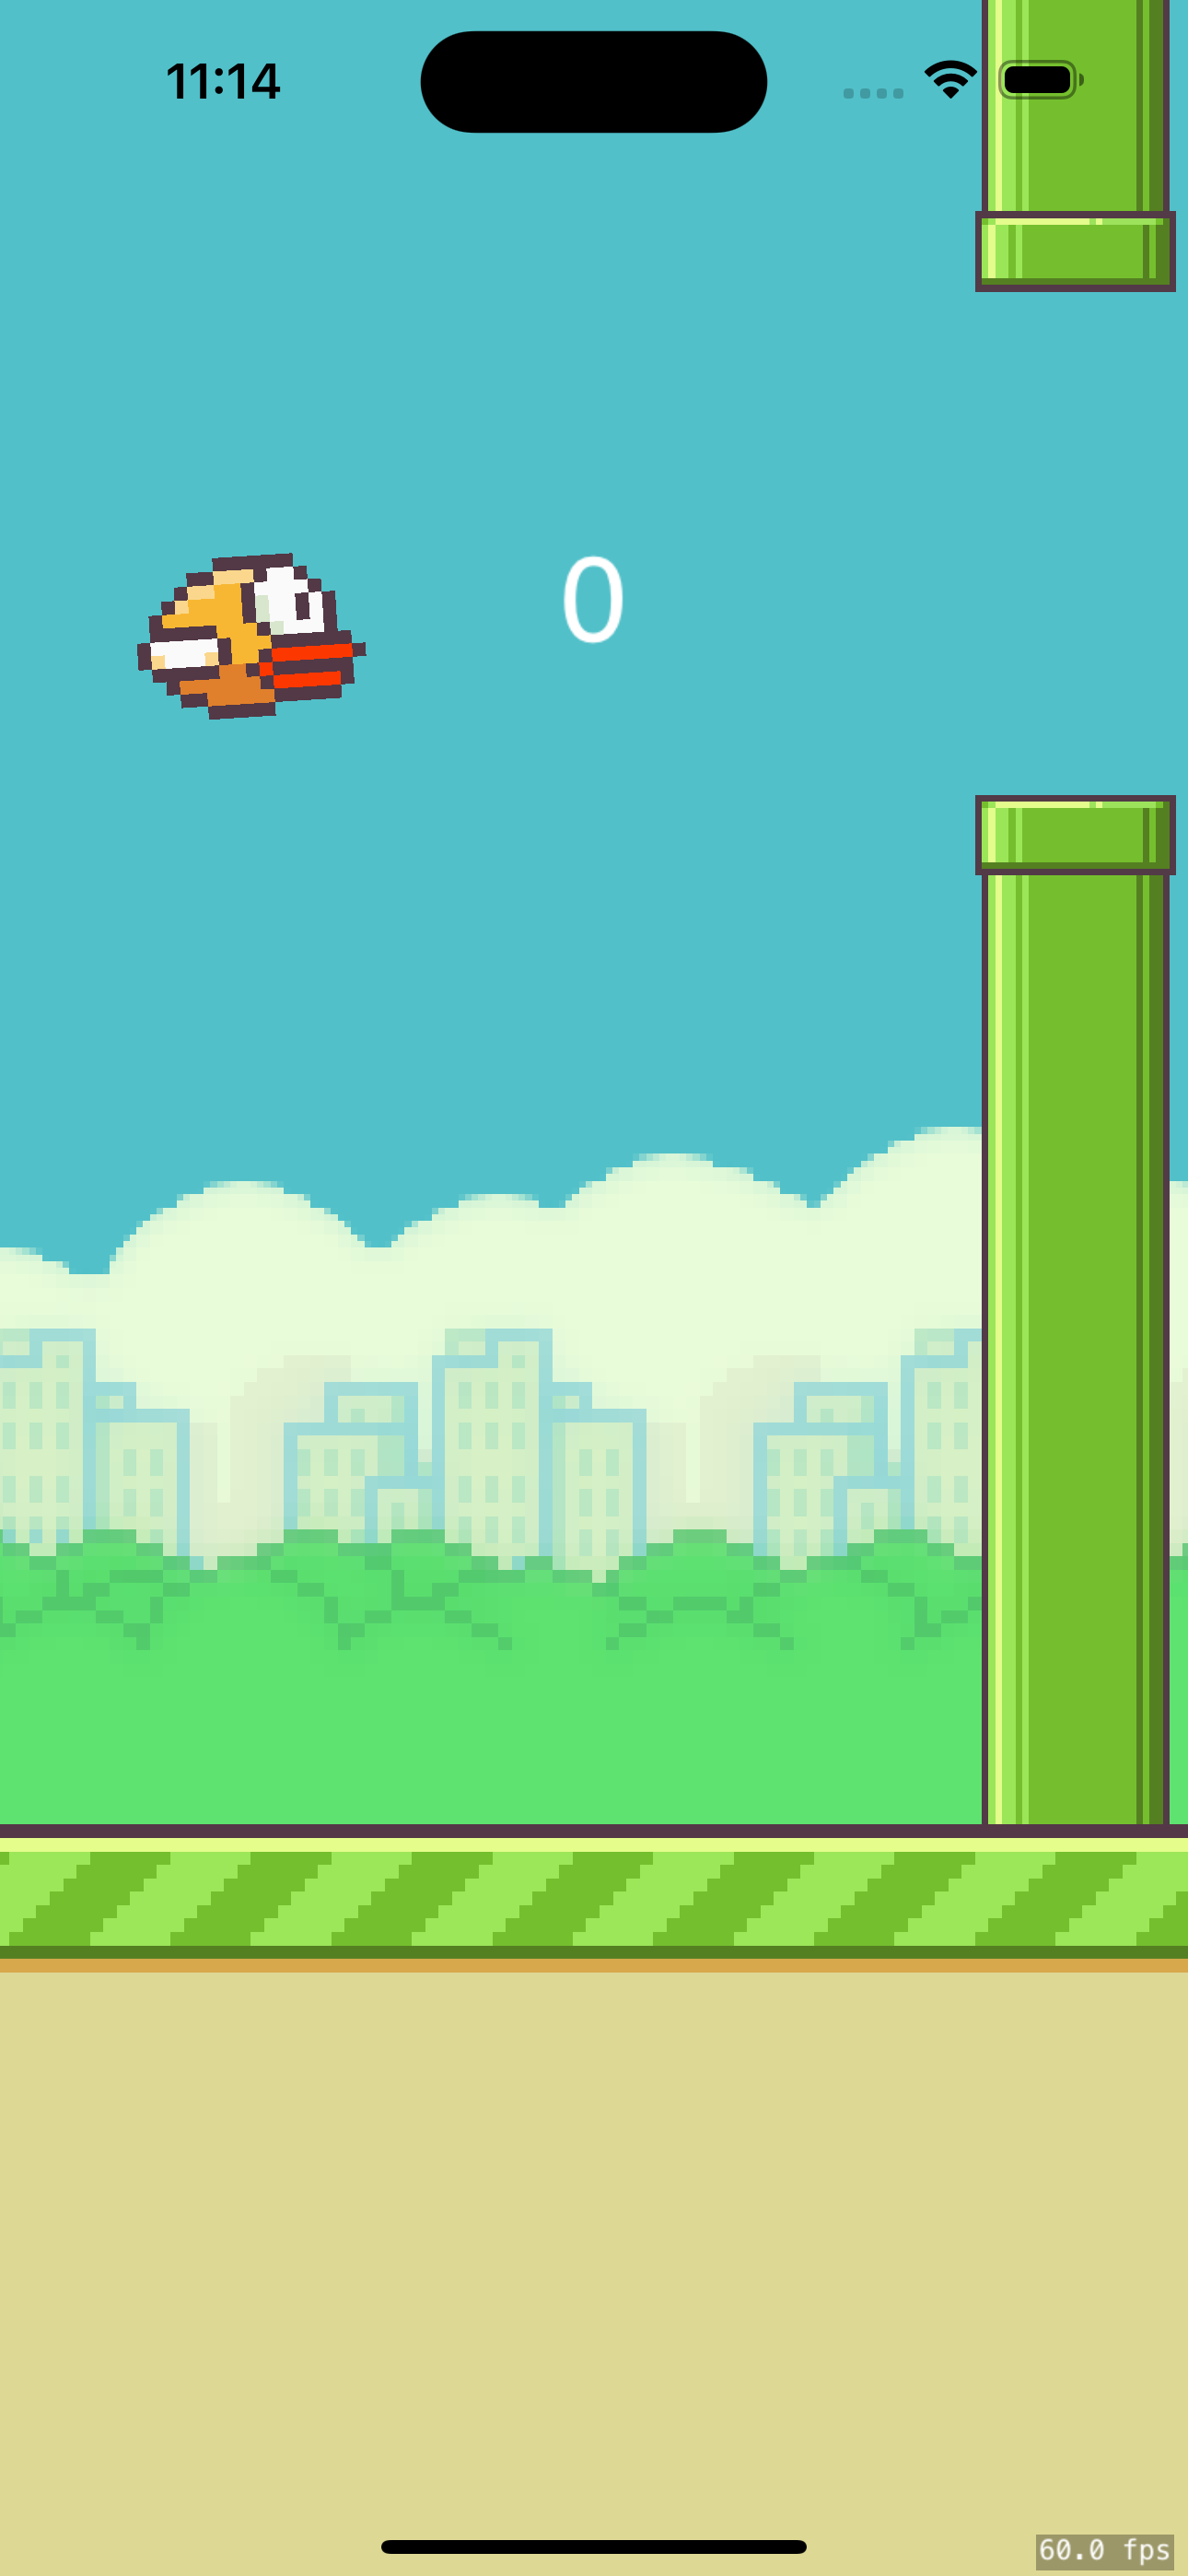 The Flappy Bird Game Interface